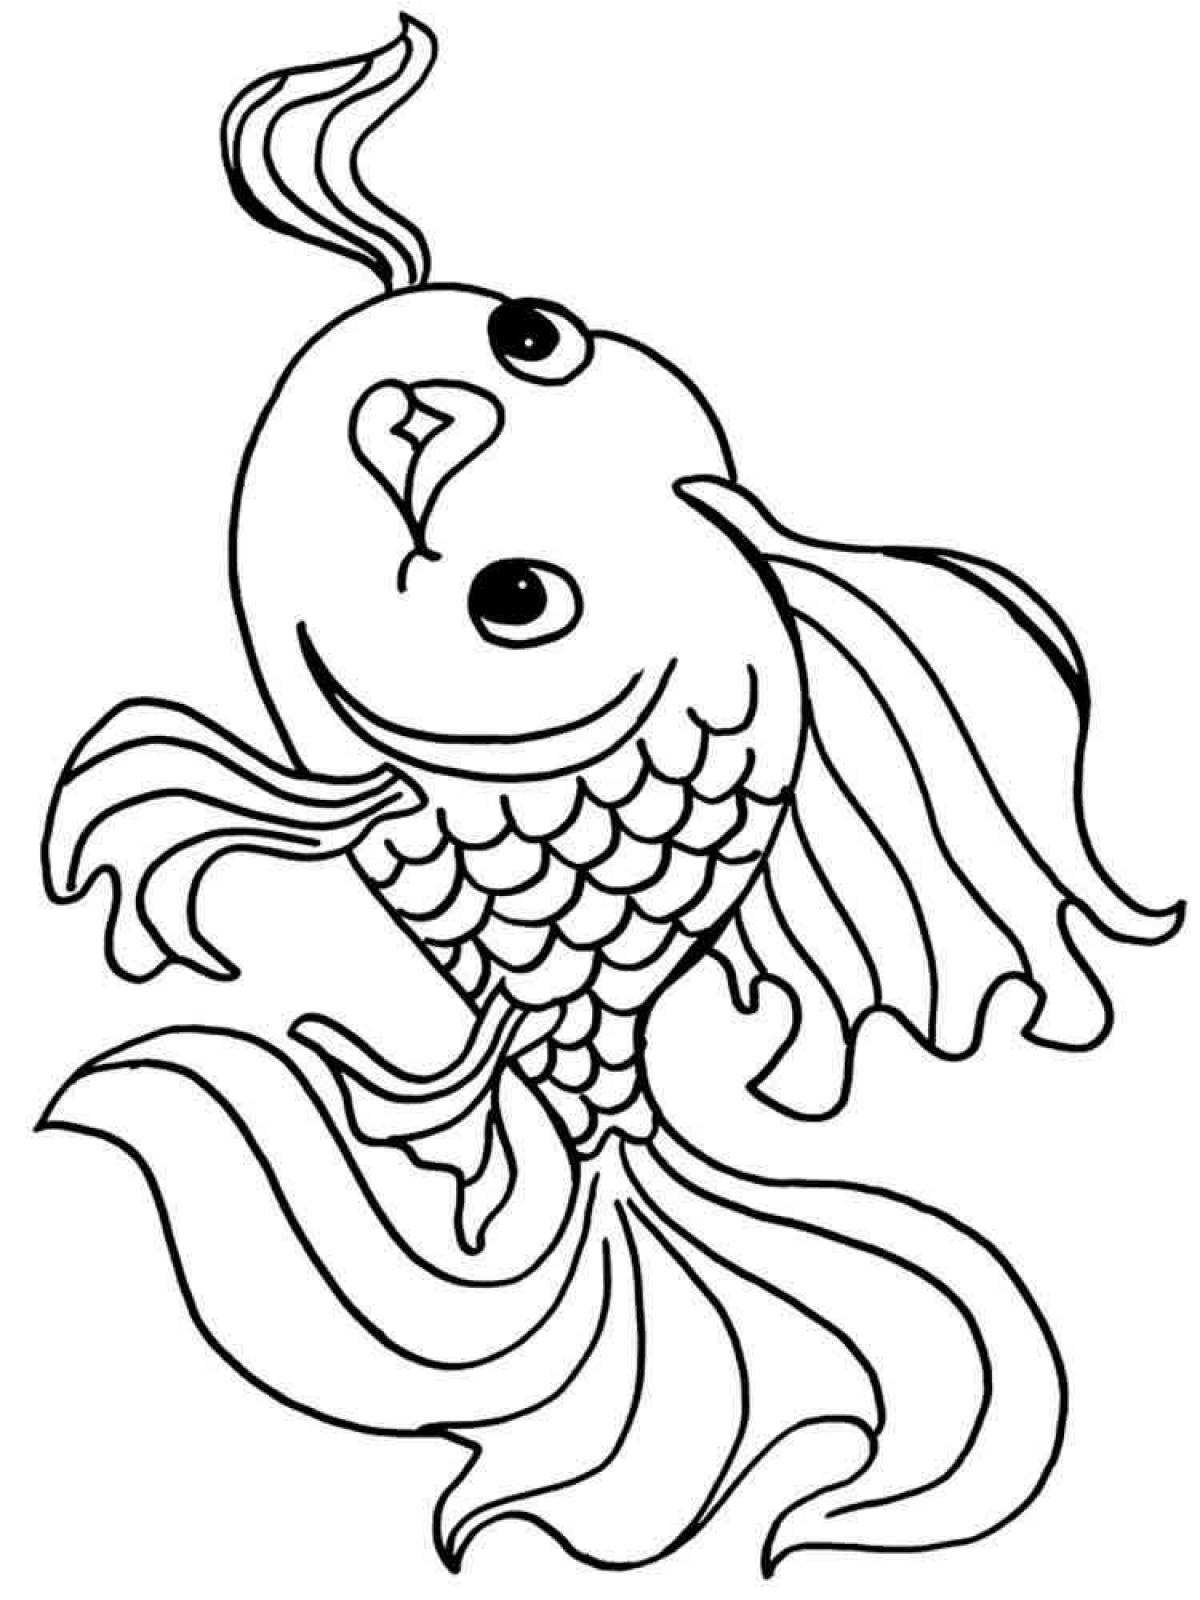 Colorful goldfish coloring pages for kids